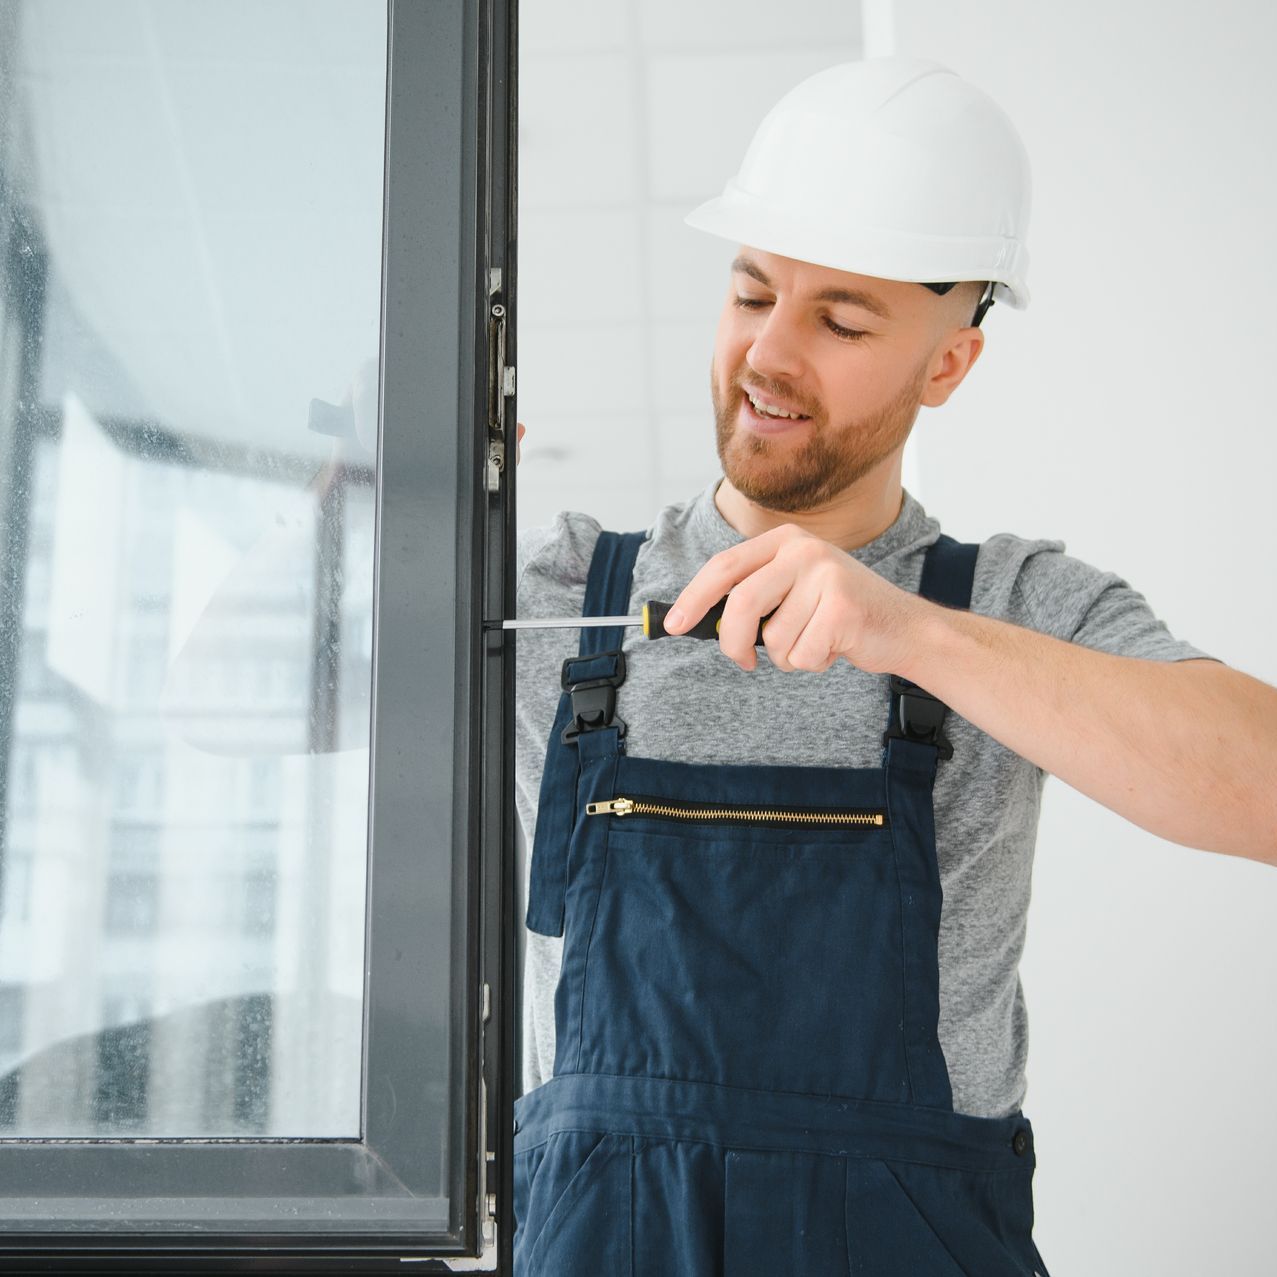 a man wearing overalls and a hard hat is working on a window .